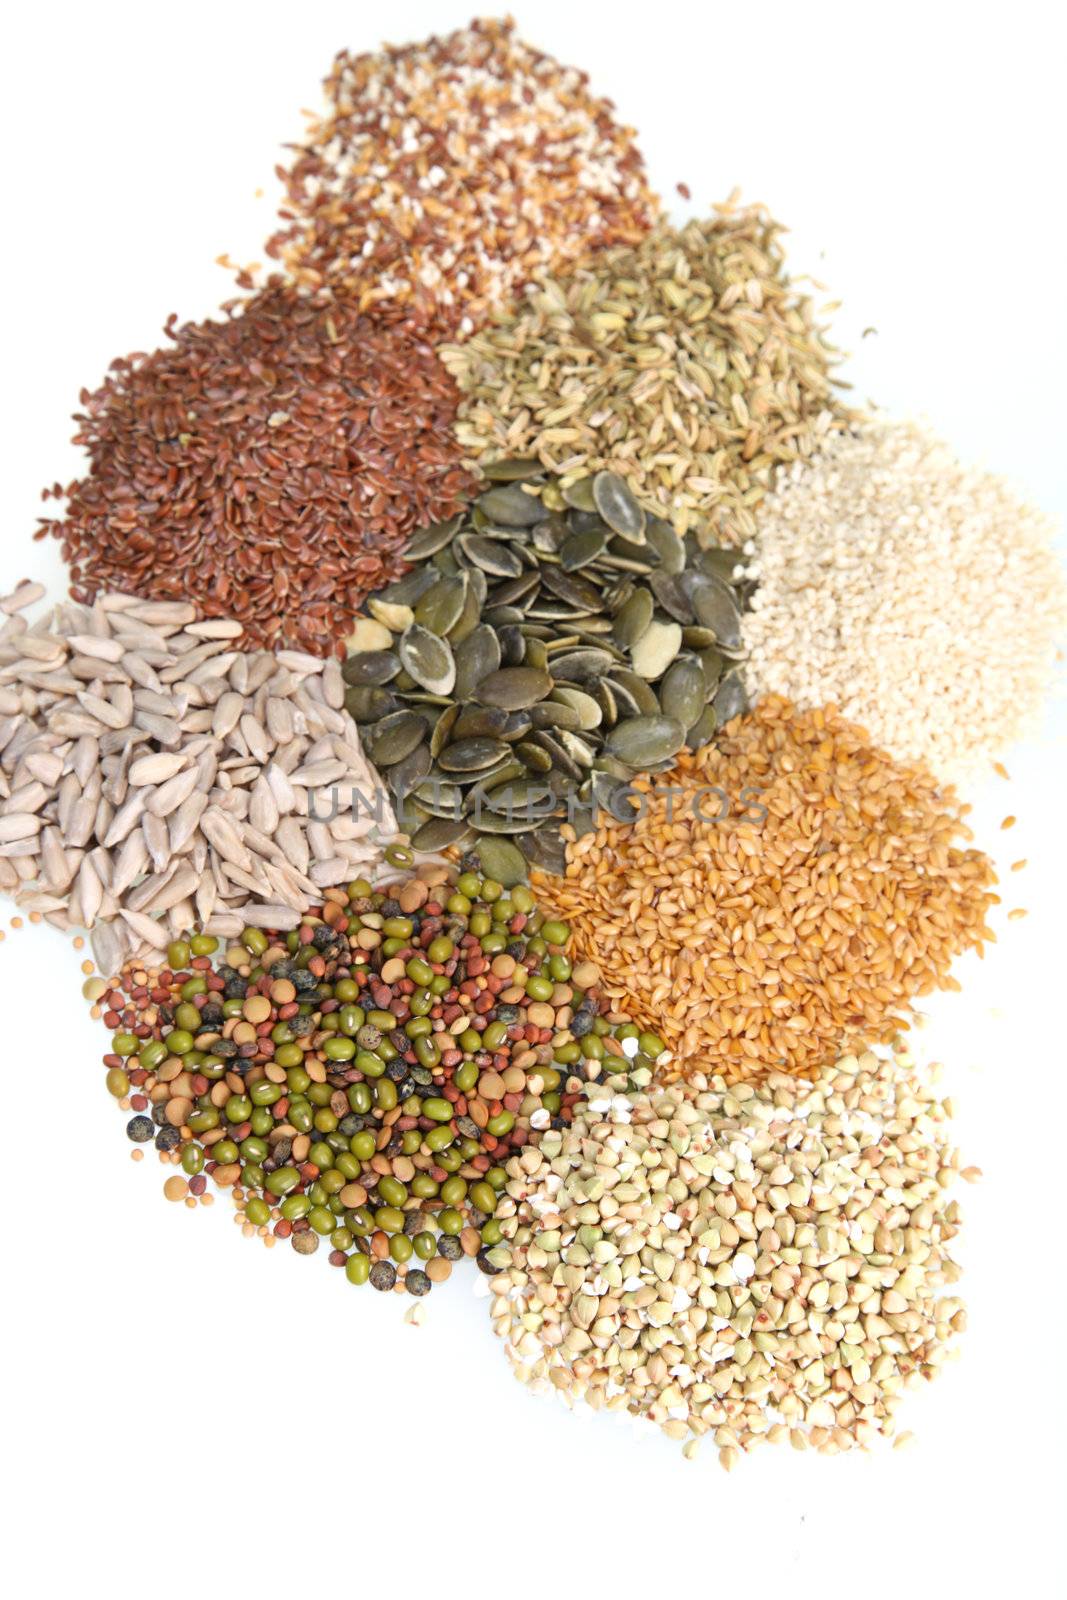 A studio shot of a variety of mixed seeds arranged small piles on a white background